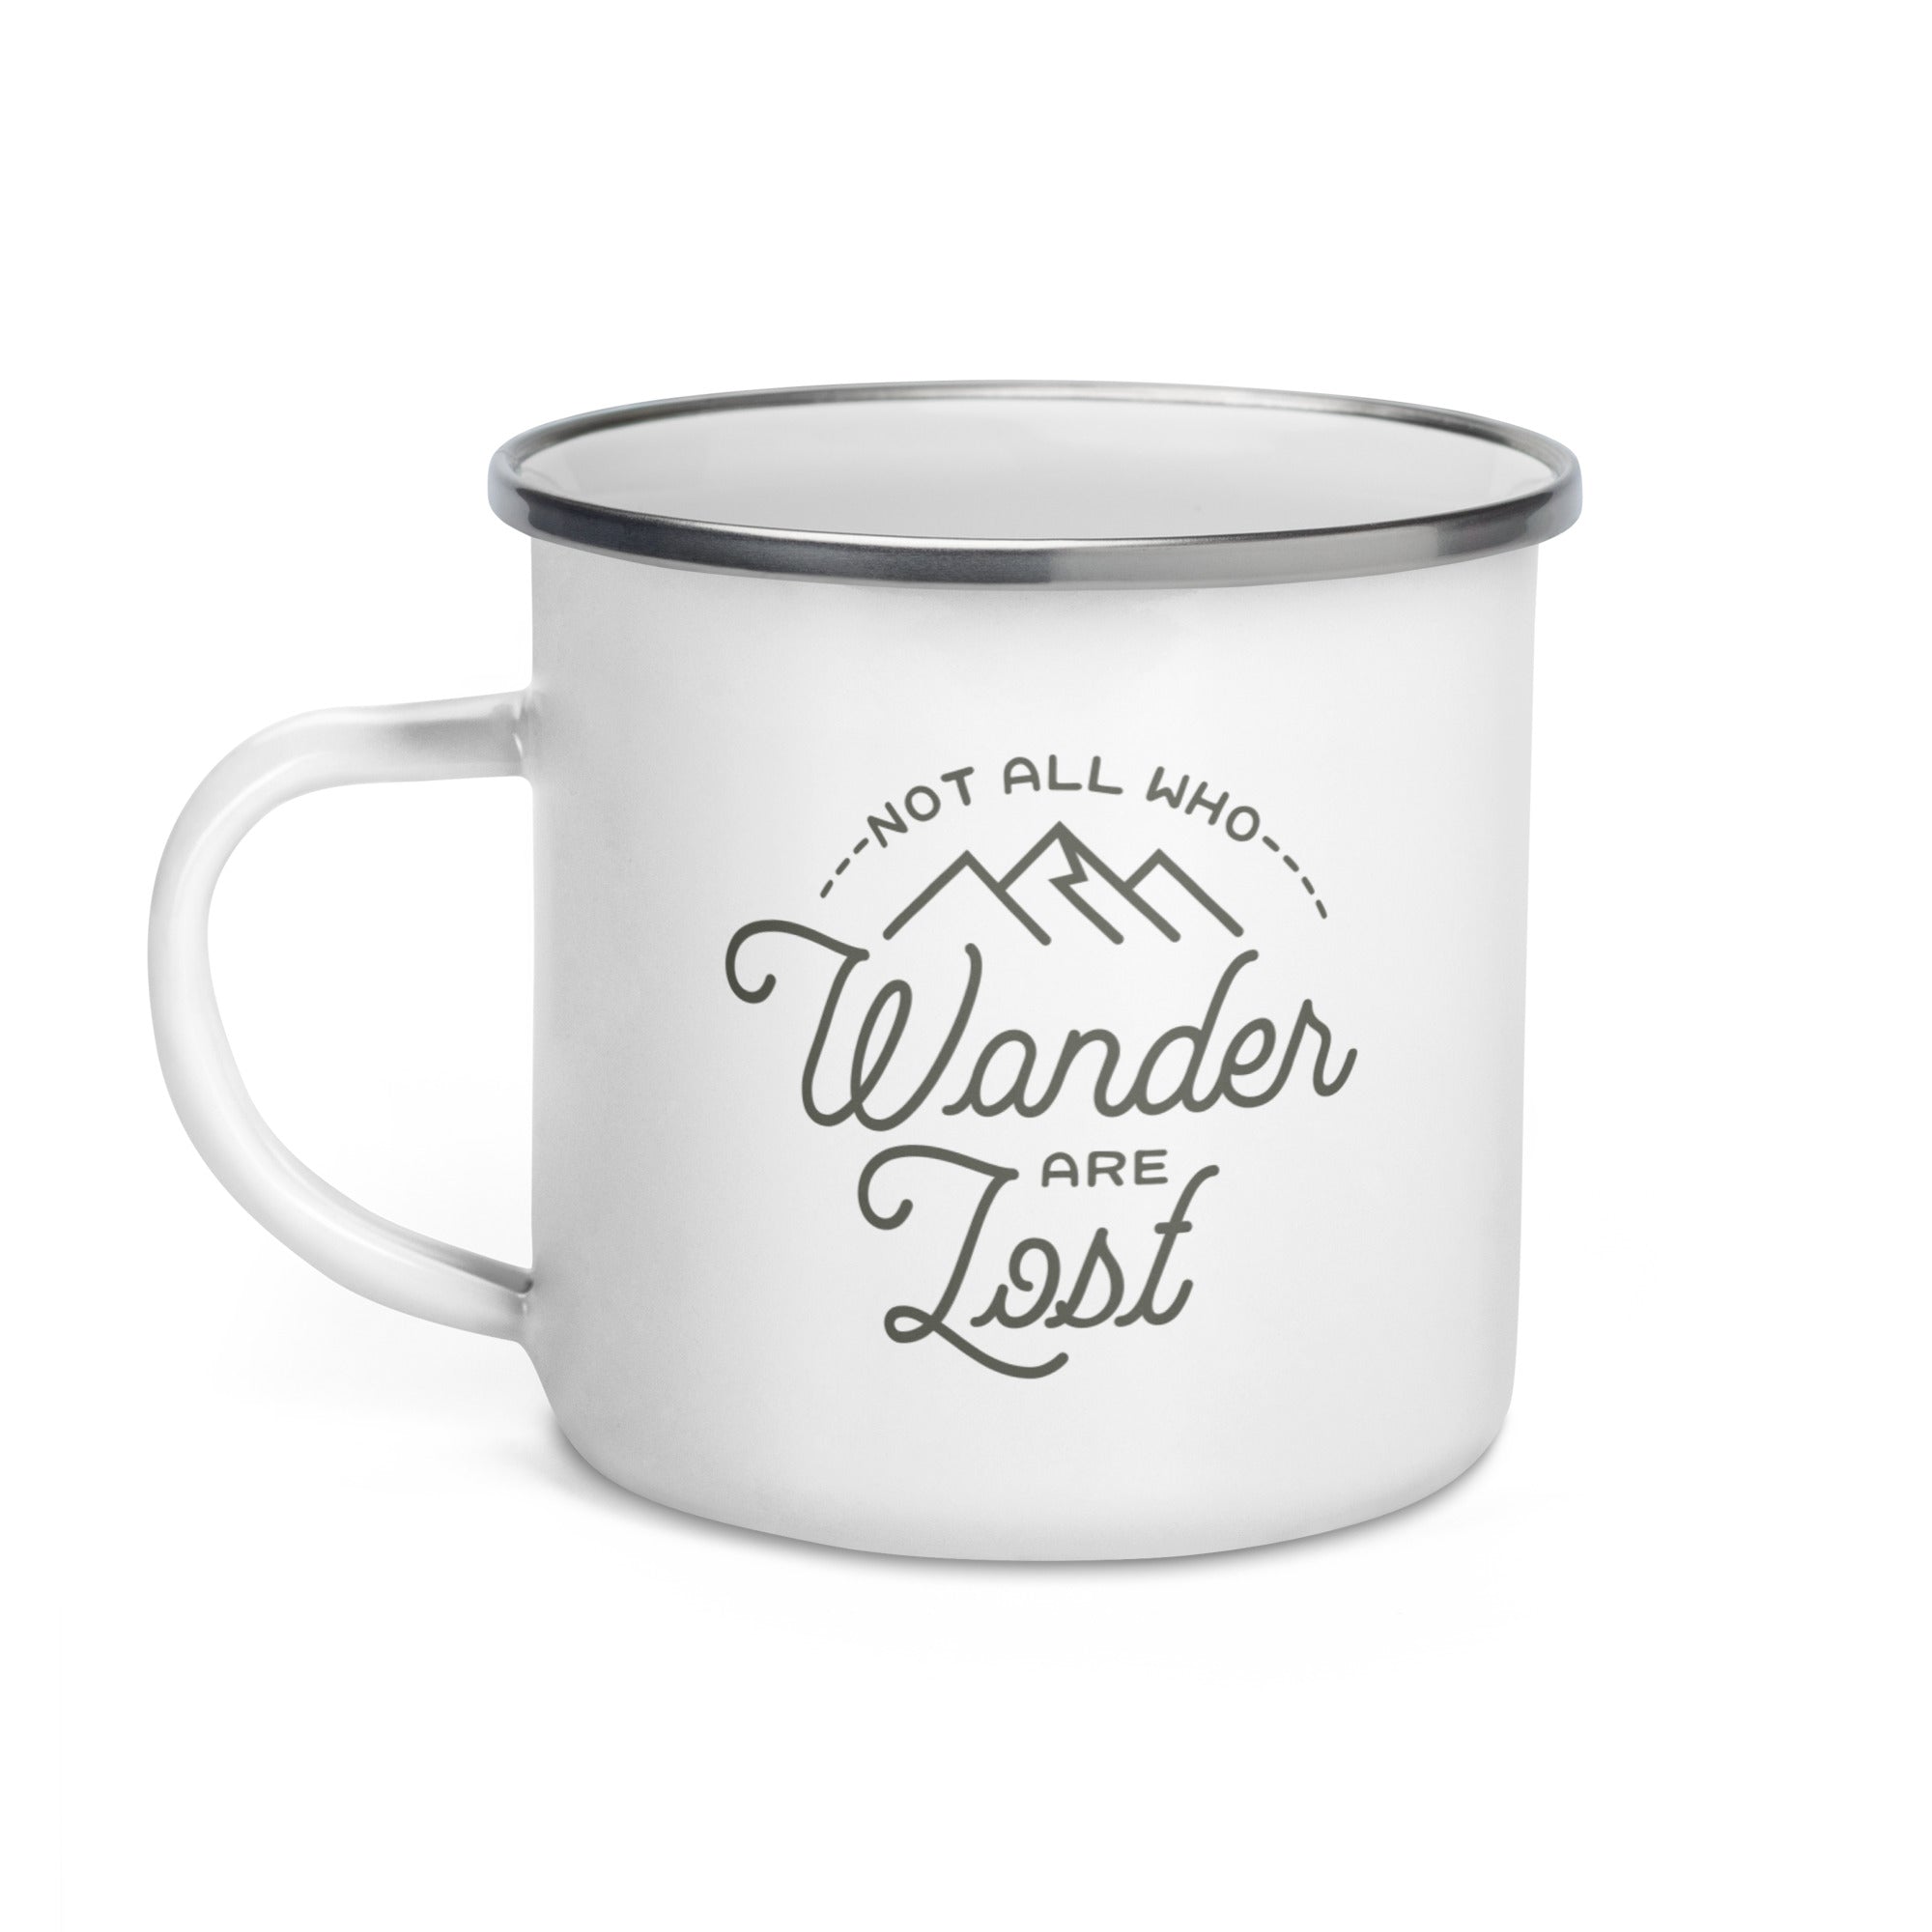 Not all who wander are lost: Enamel Camper Mug with Classic Design